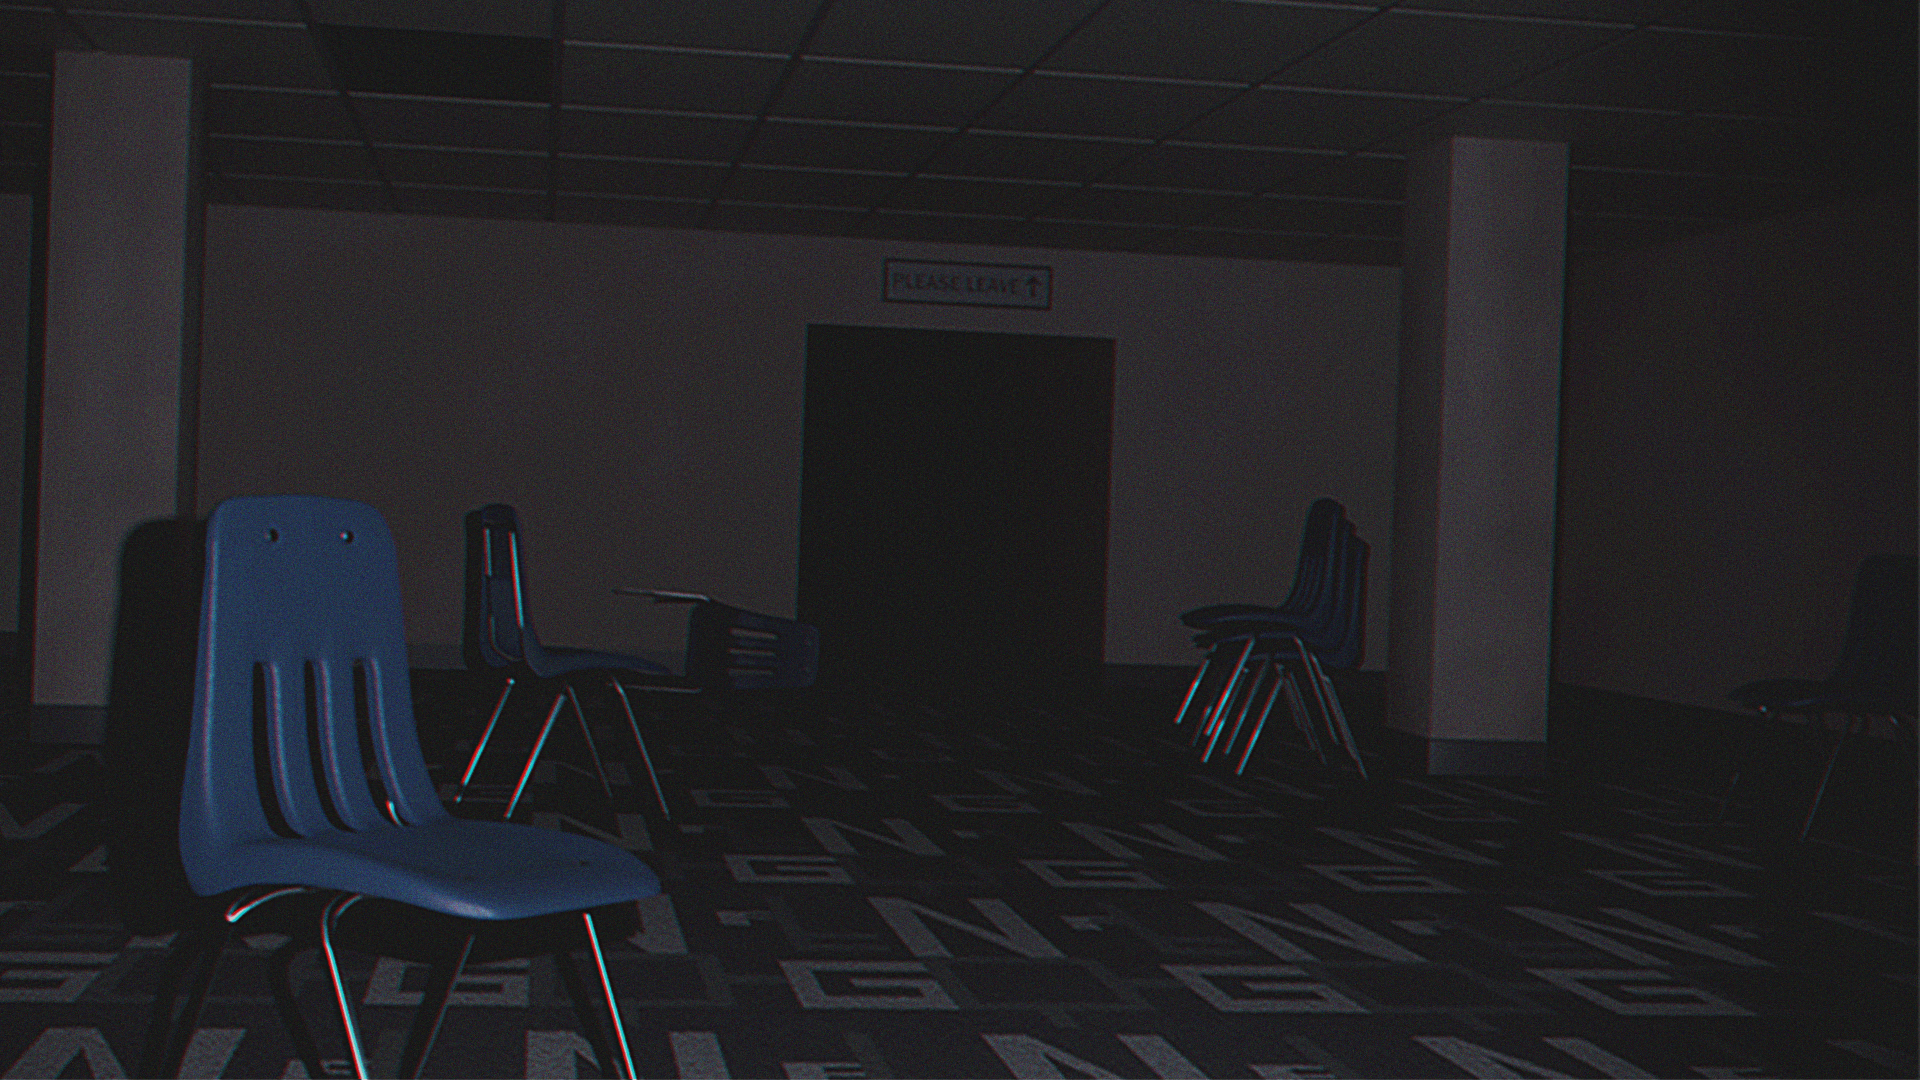 Made my own liminal space in Blender